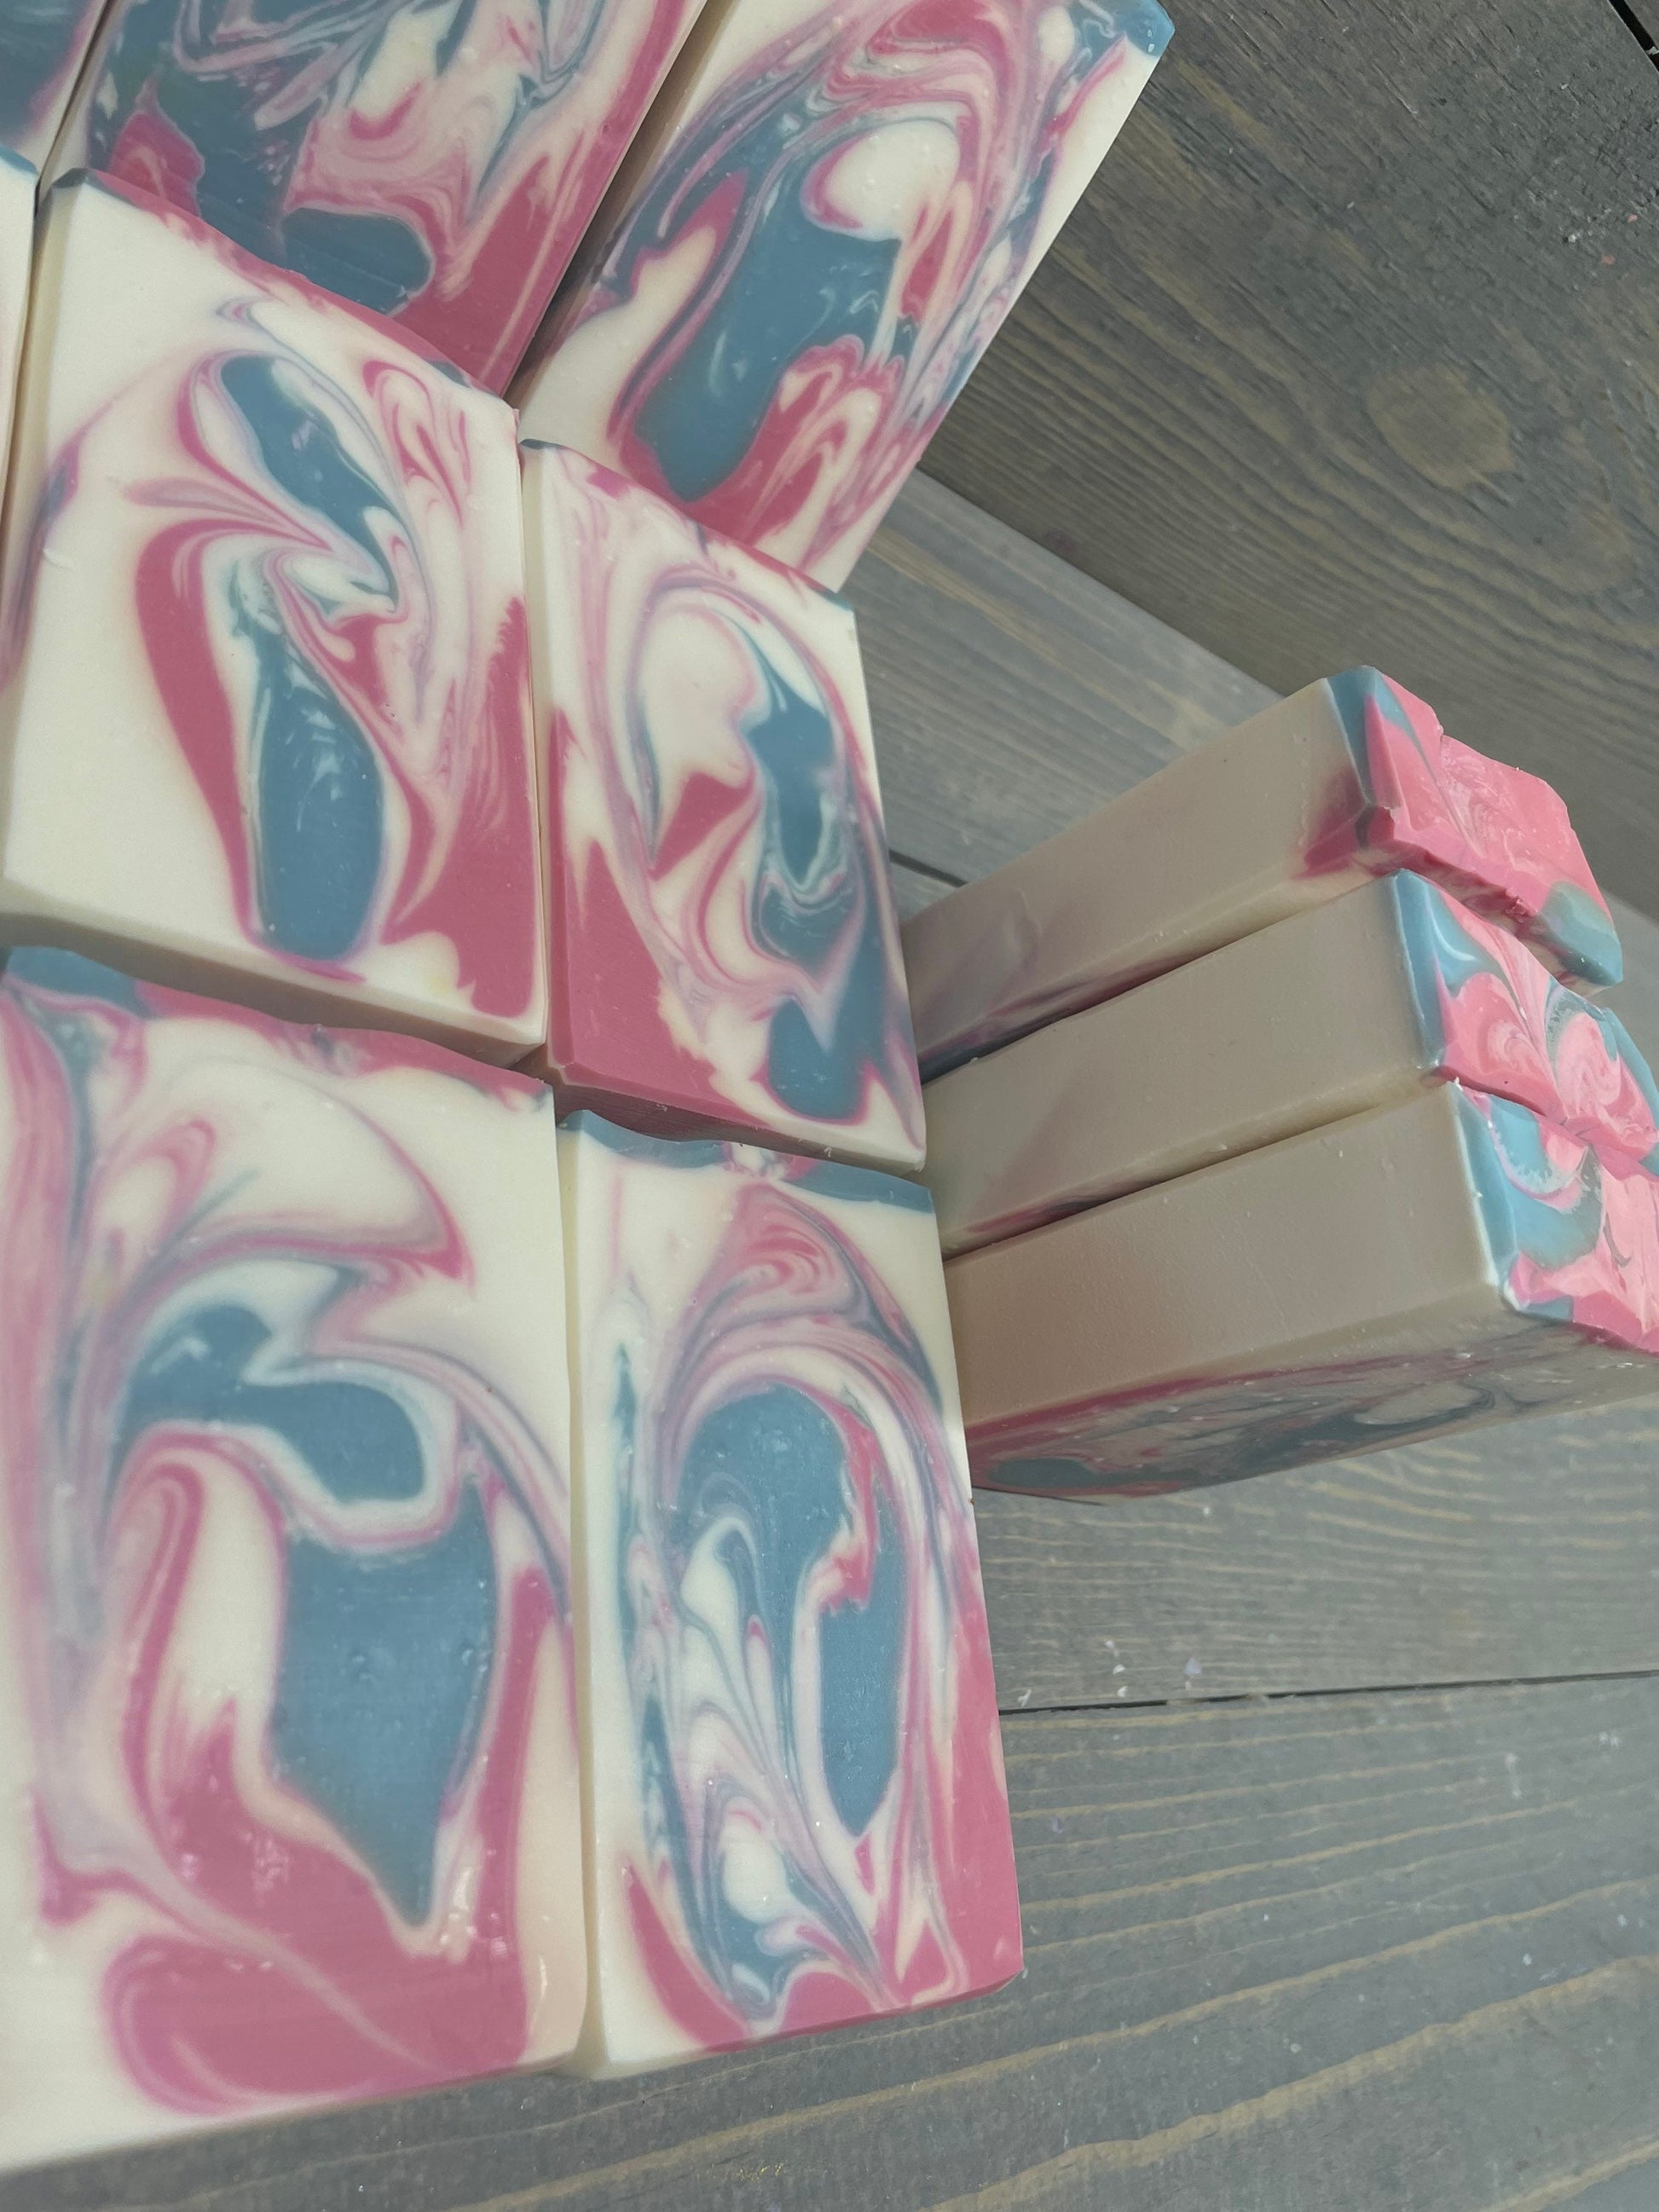 a photo of Angel soap with red, black and white swirls